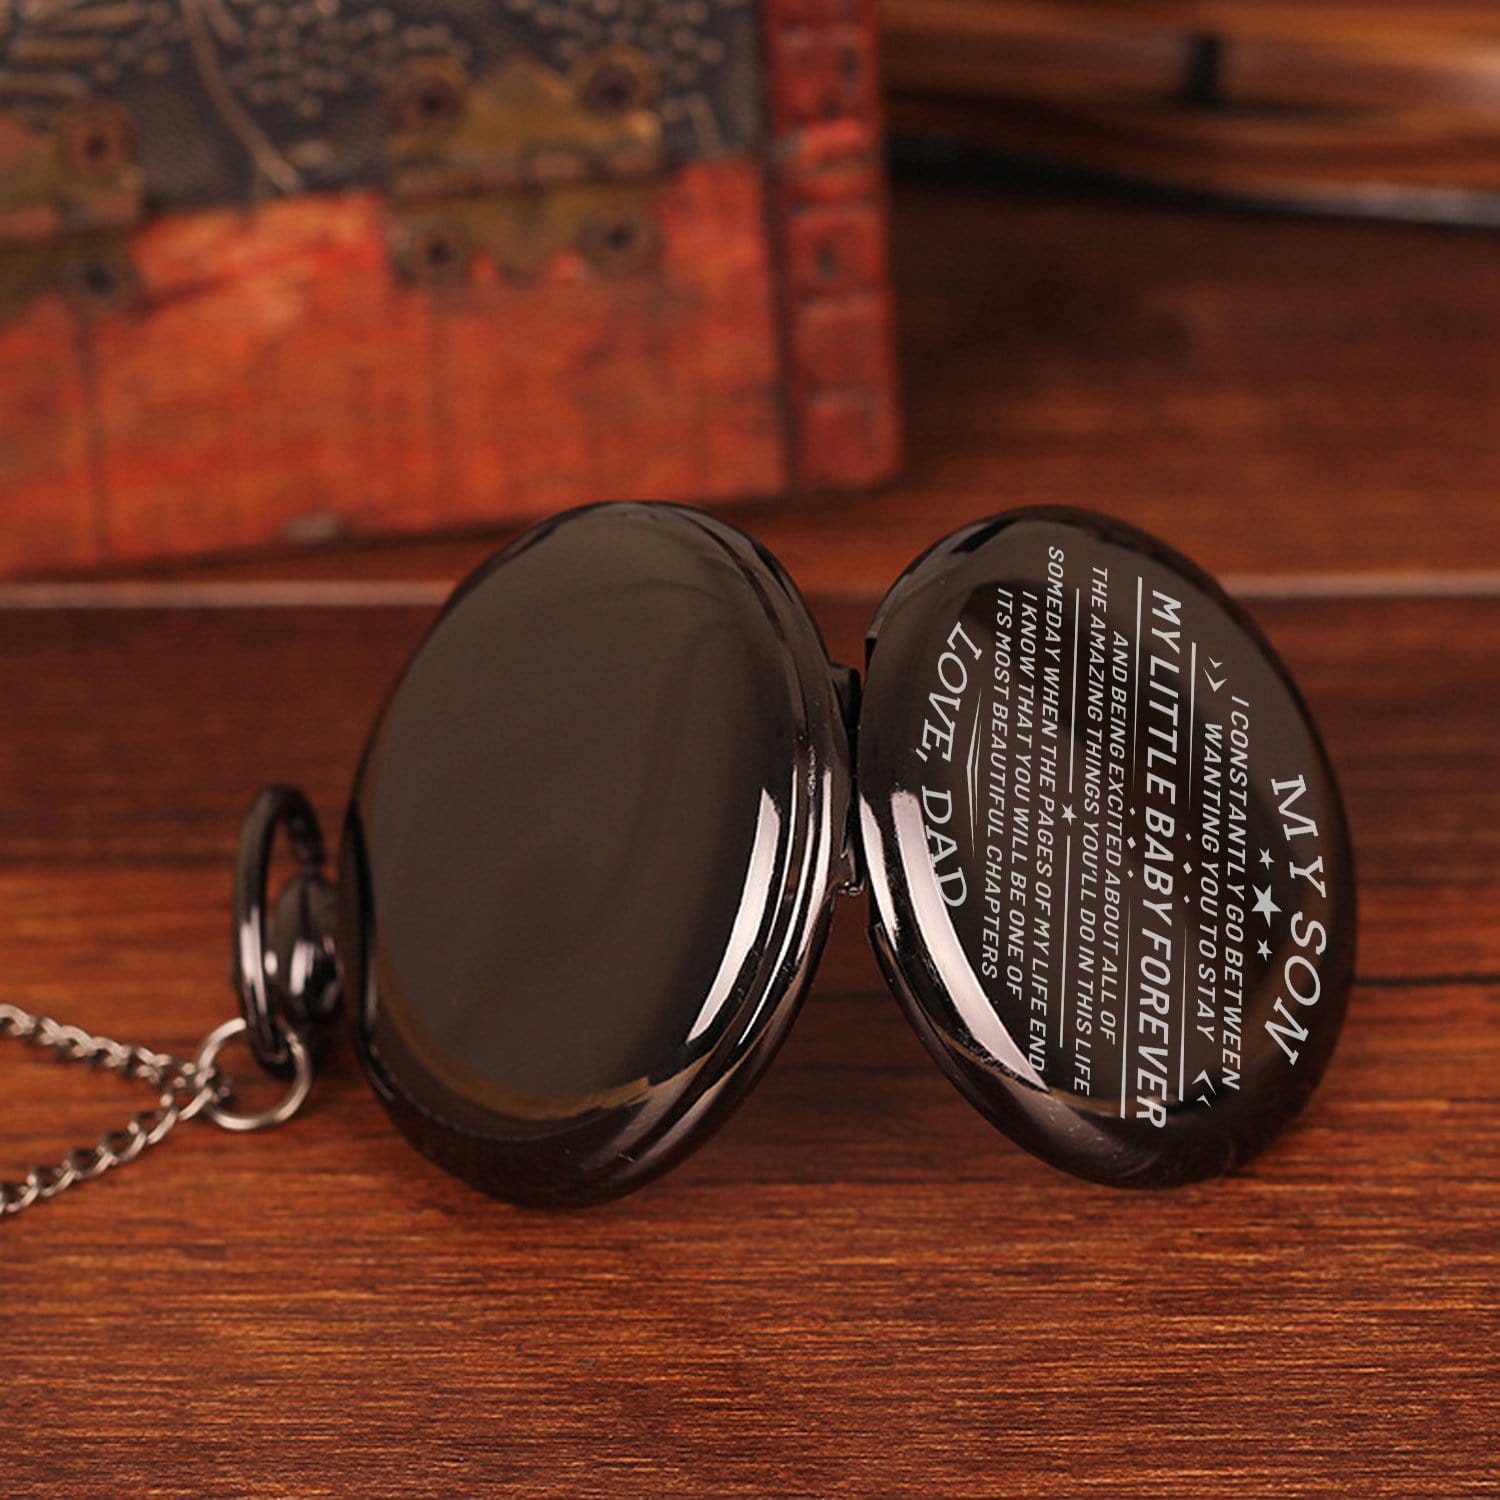 Pocket Watches Dad To Son - My Little Baby Forever Pocket Watch GiveMe-Gifts